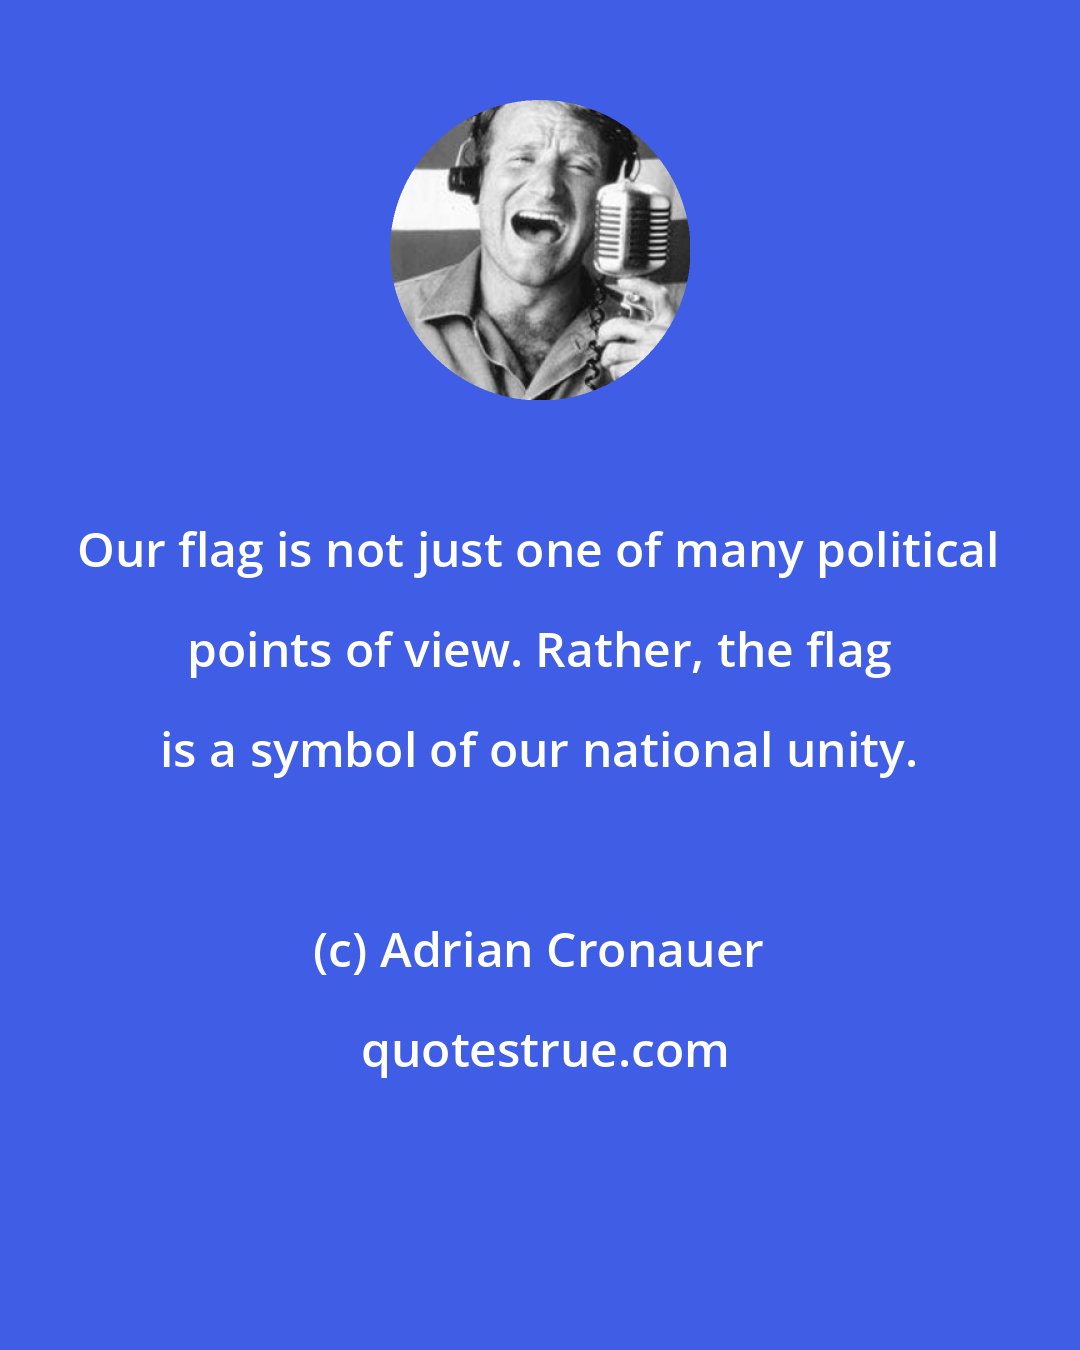 Adrian Cronauer: Our flag is not just one of many political points of view. Rather, the flag is a symbol of our national unity.